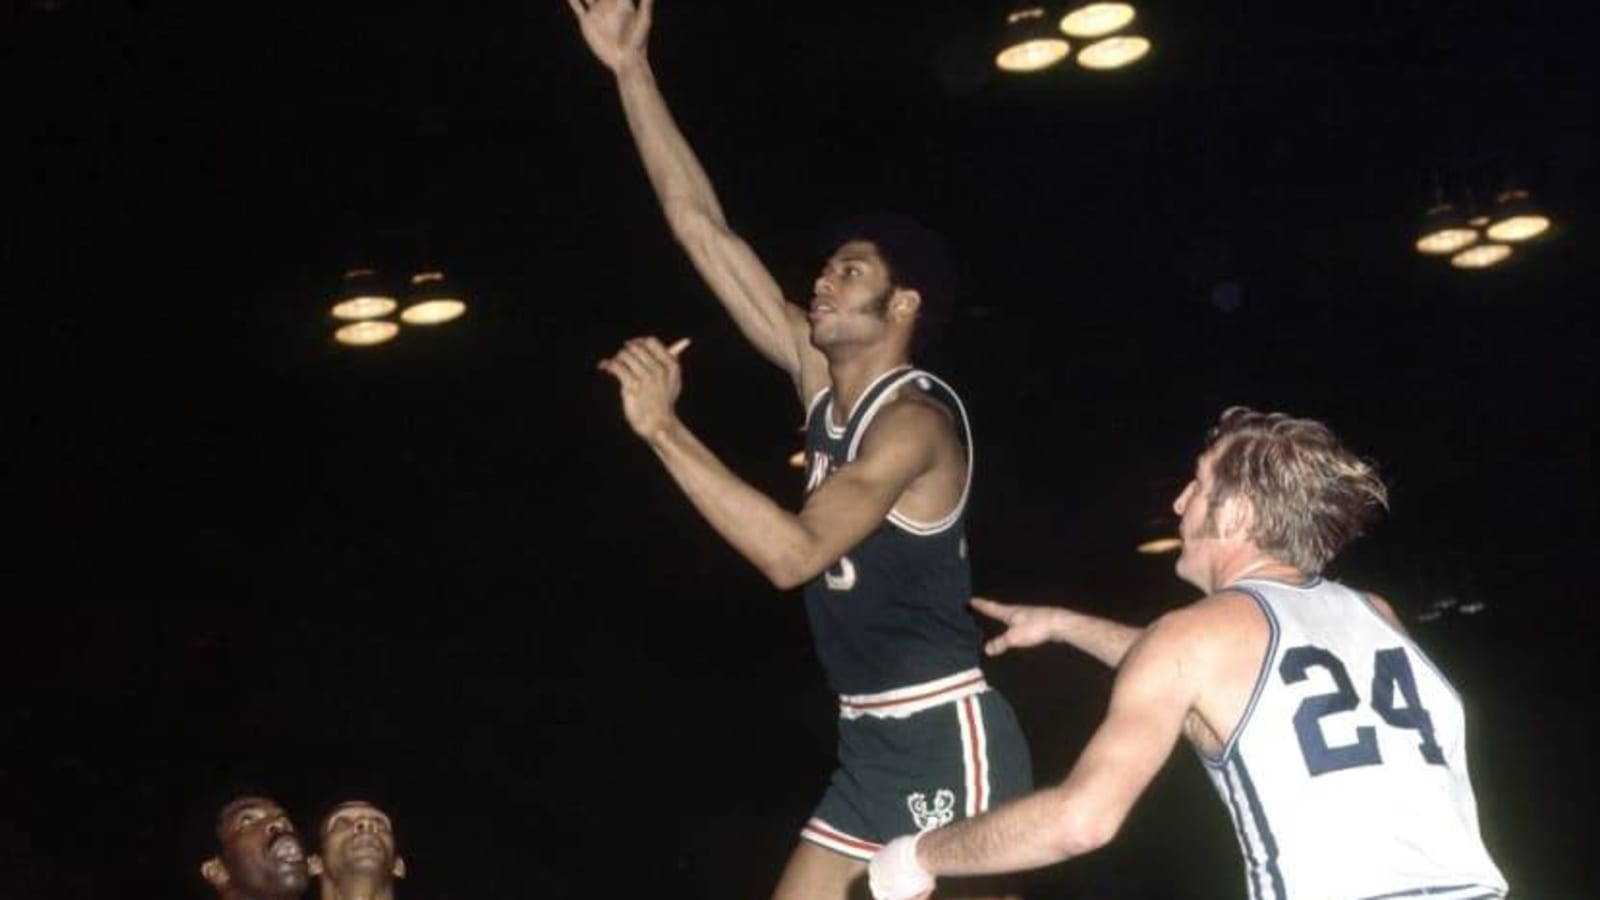 Why Robert Parish says Kareem Abdul-Jabbar was the best opponent he ever faced